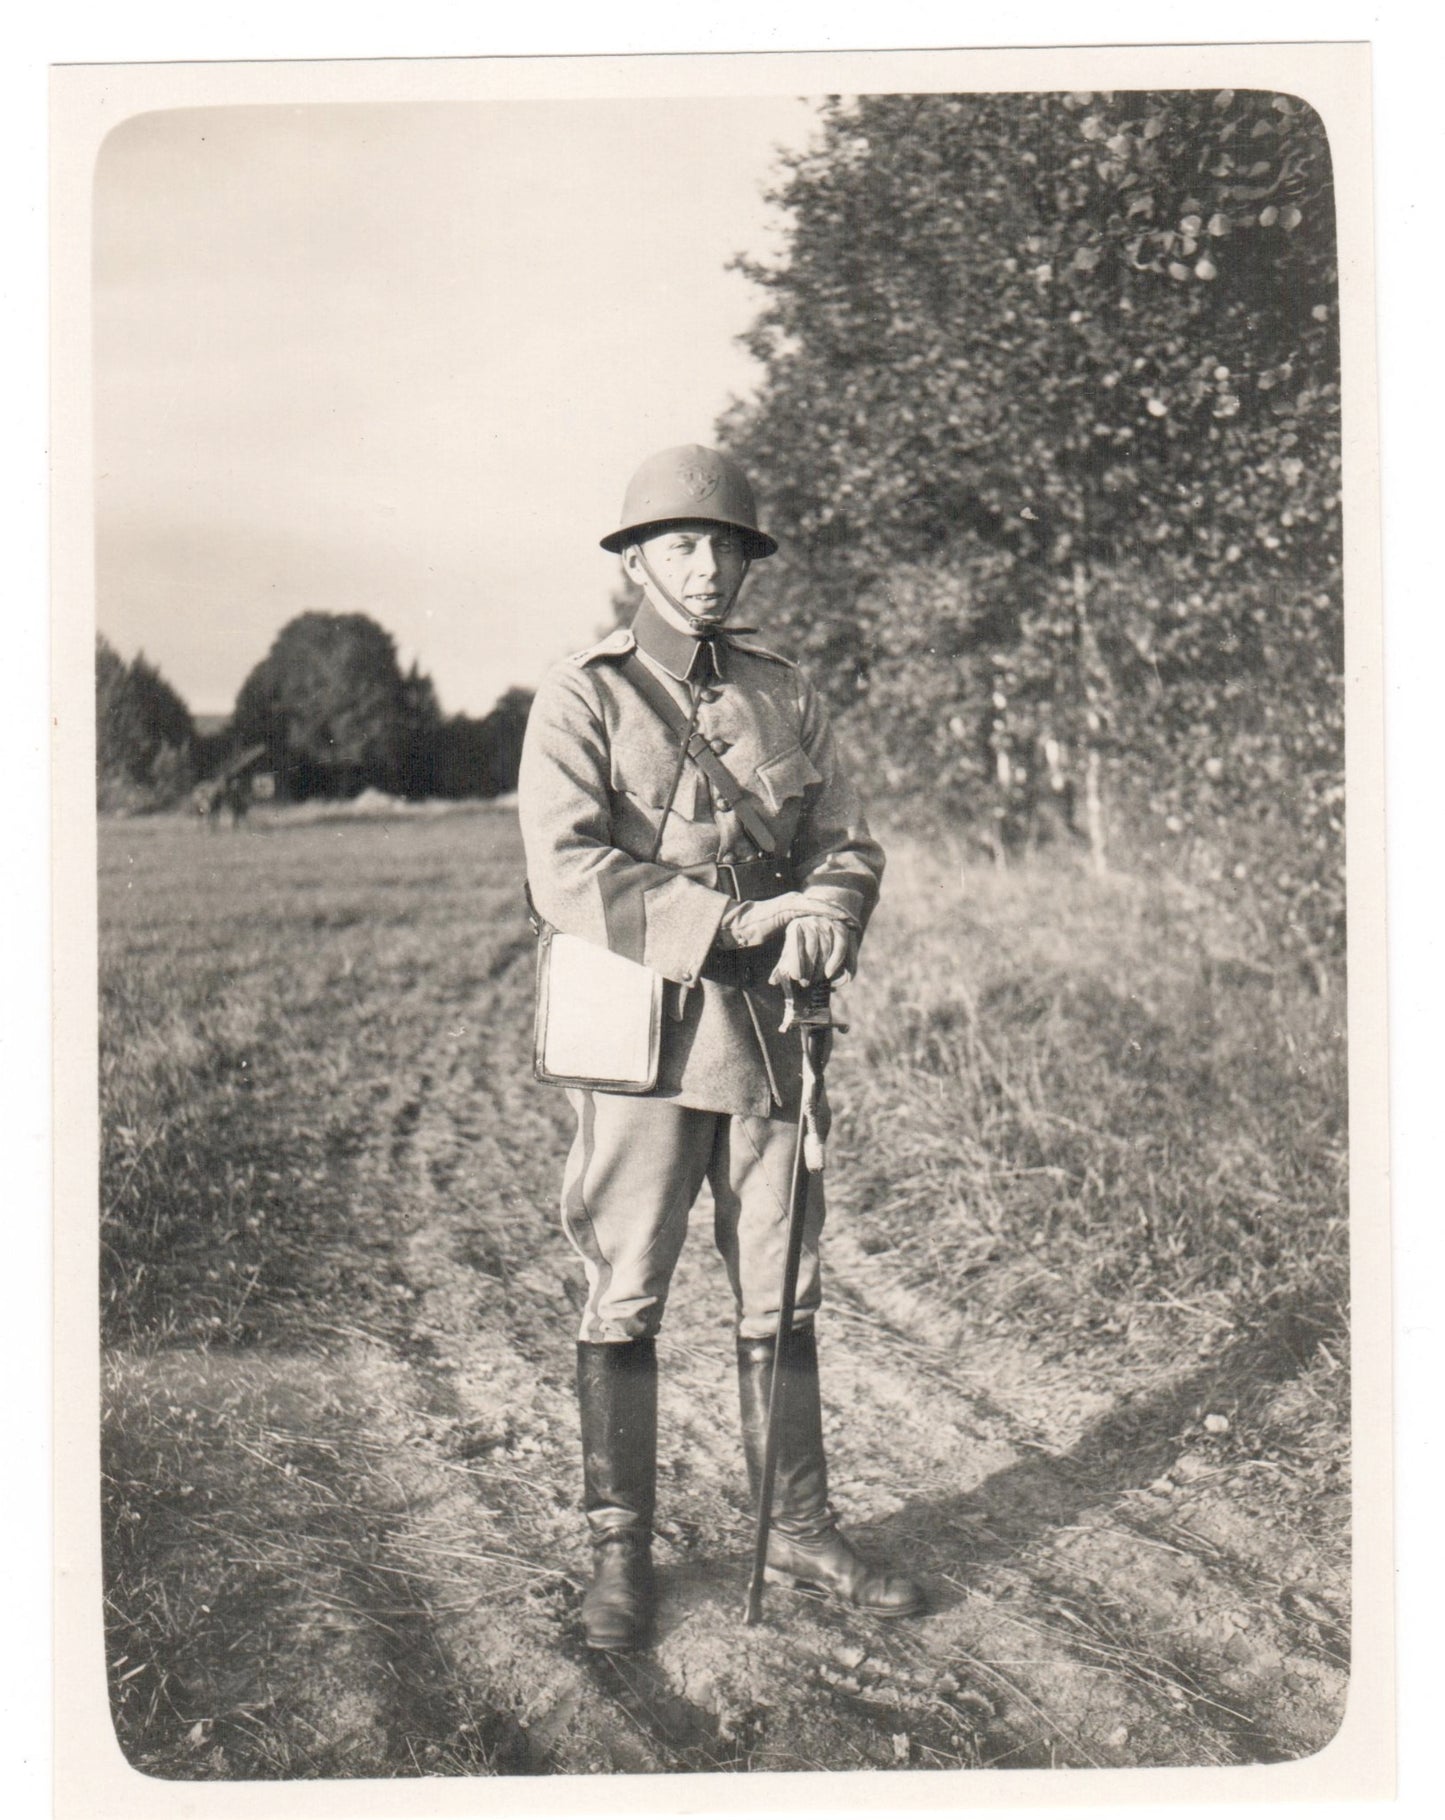 Vintage Photography - Portrait of a Solider - European Military Forces - Sweden